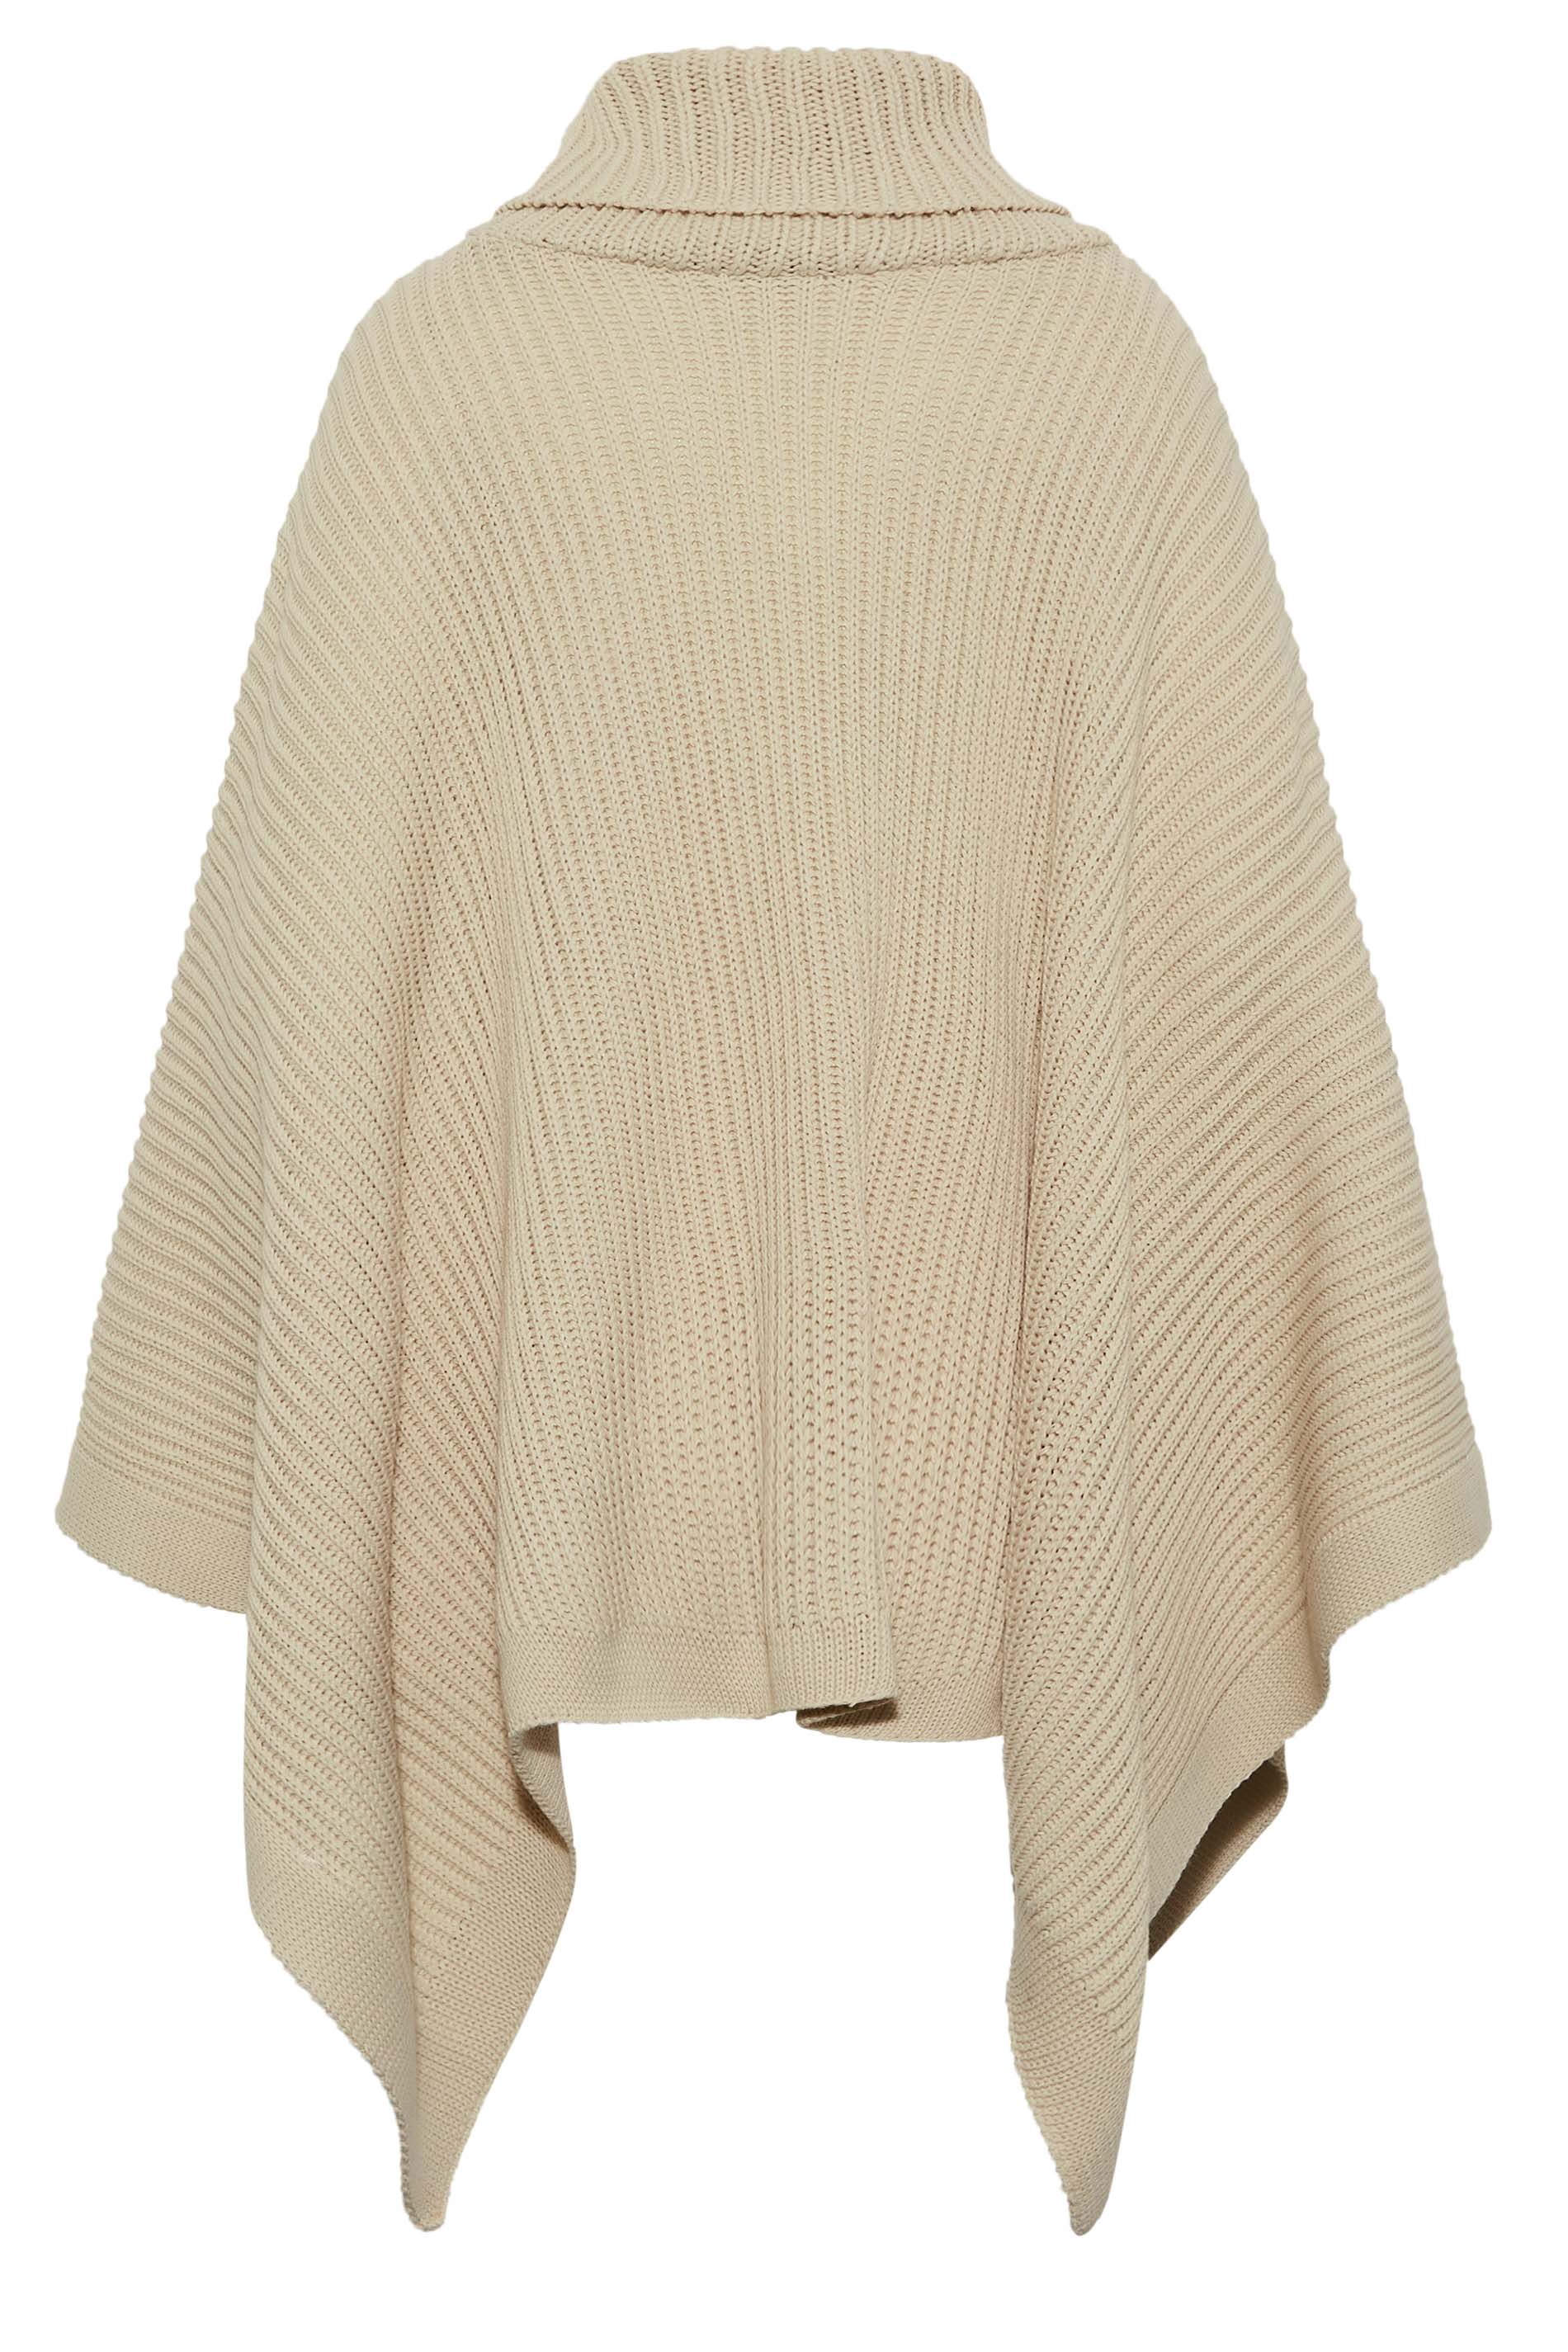 Buy Lipsy Super Soft Cosy Roll Neck Cable Knit Poncho from Next USA